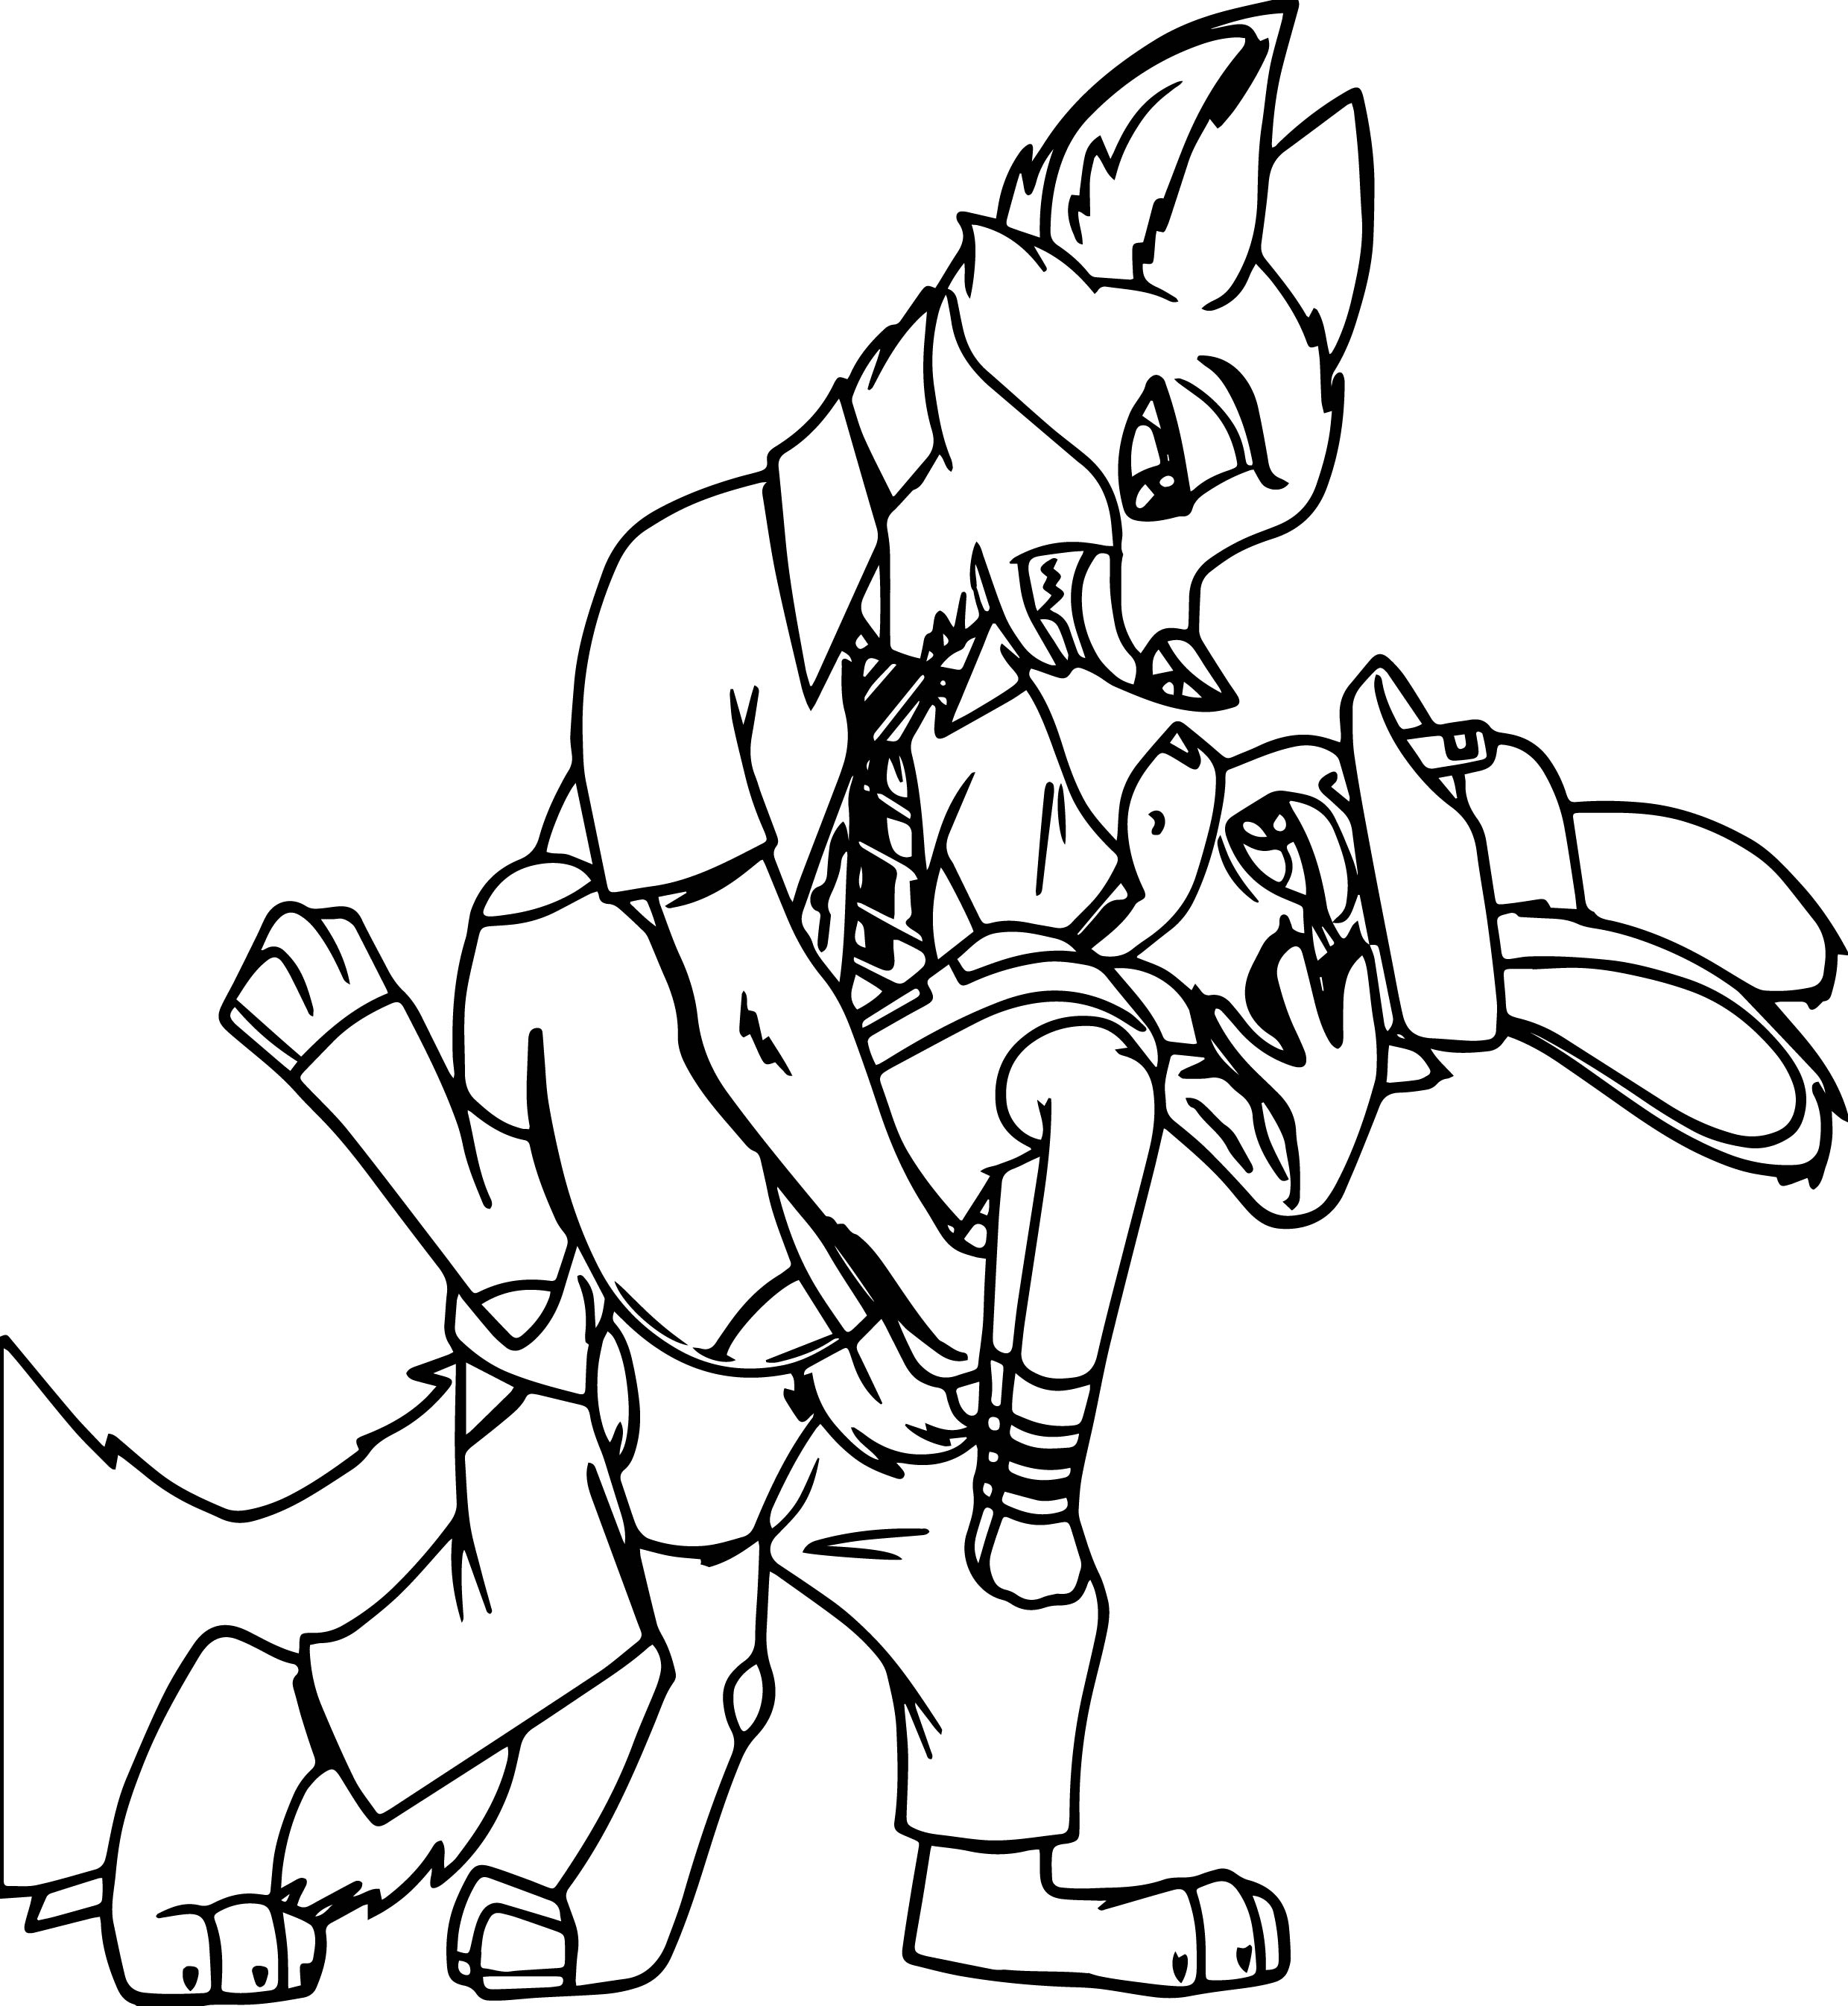 Cartoon Fox Coloring Pages at GetColoringscom Free